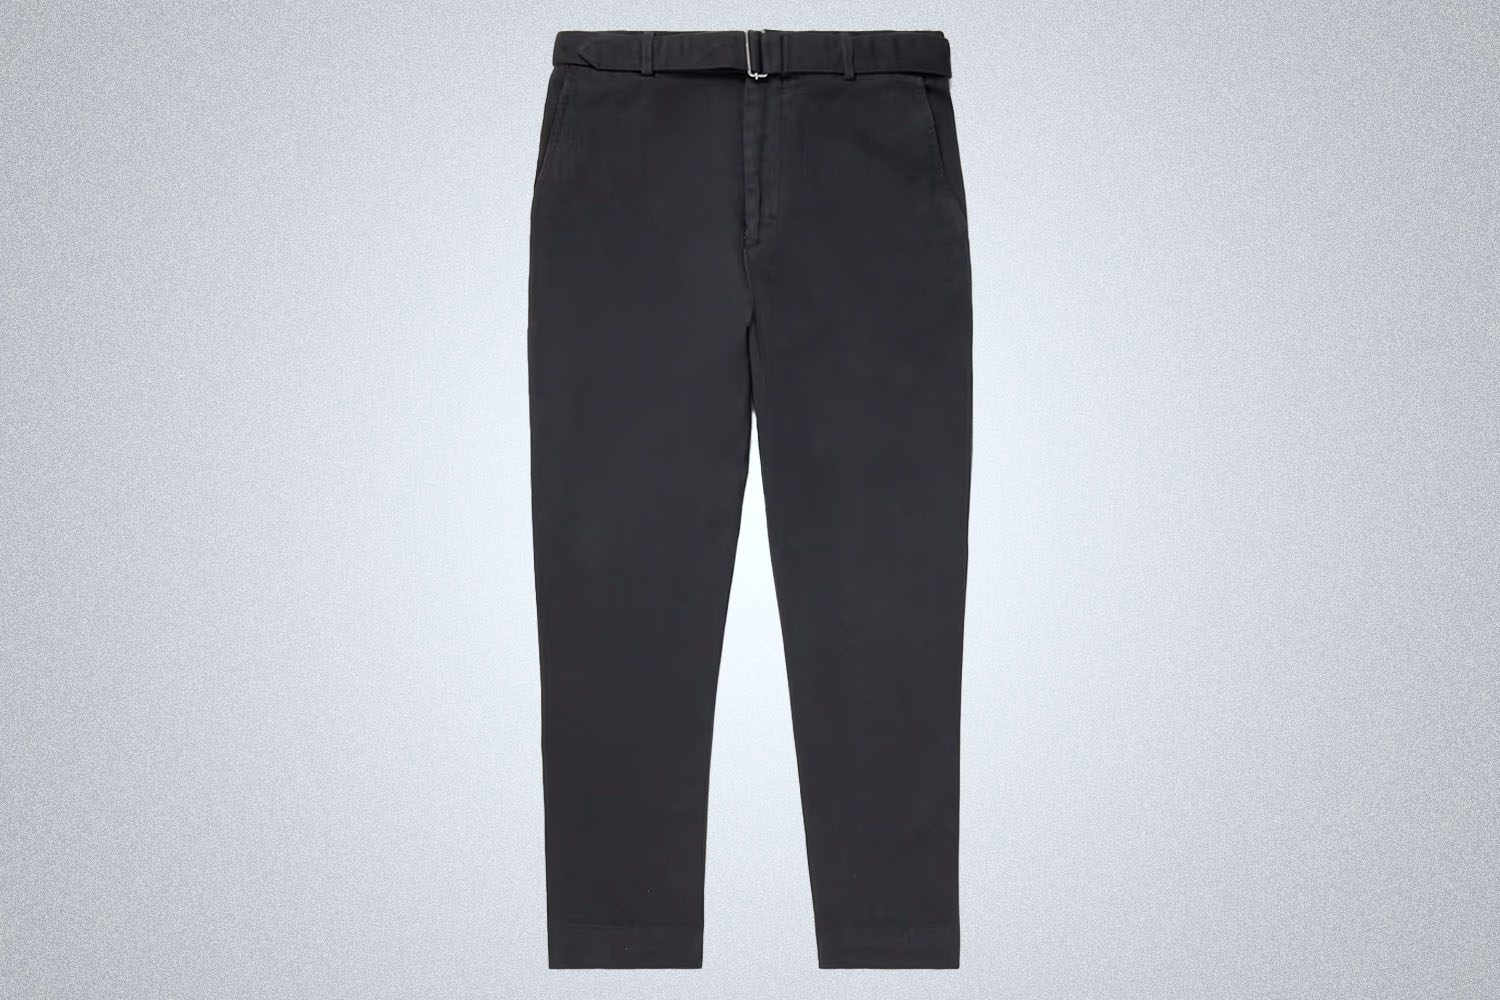 a pair of chinos from Officine General on a grey background